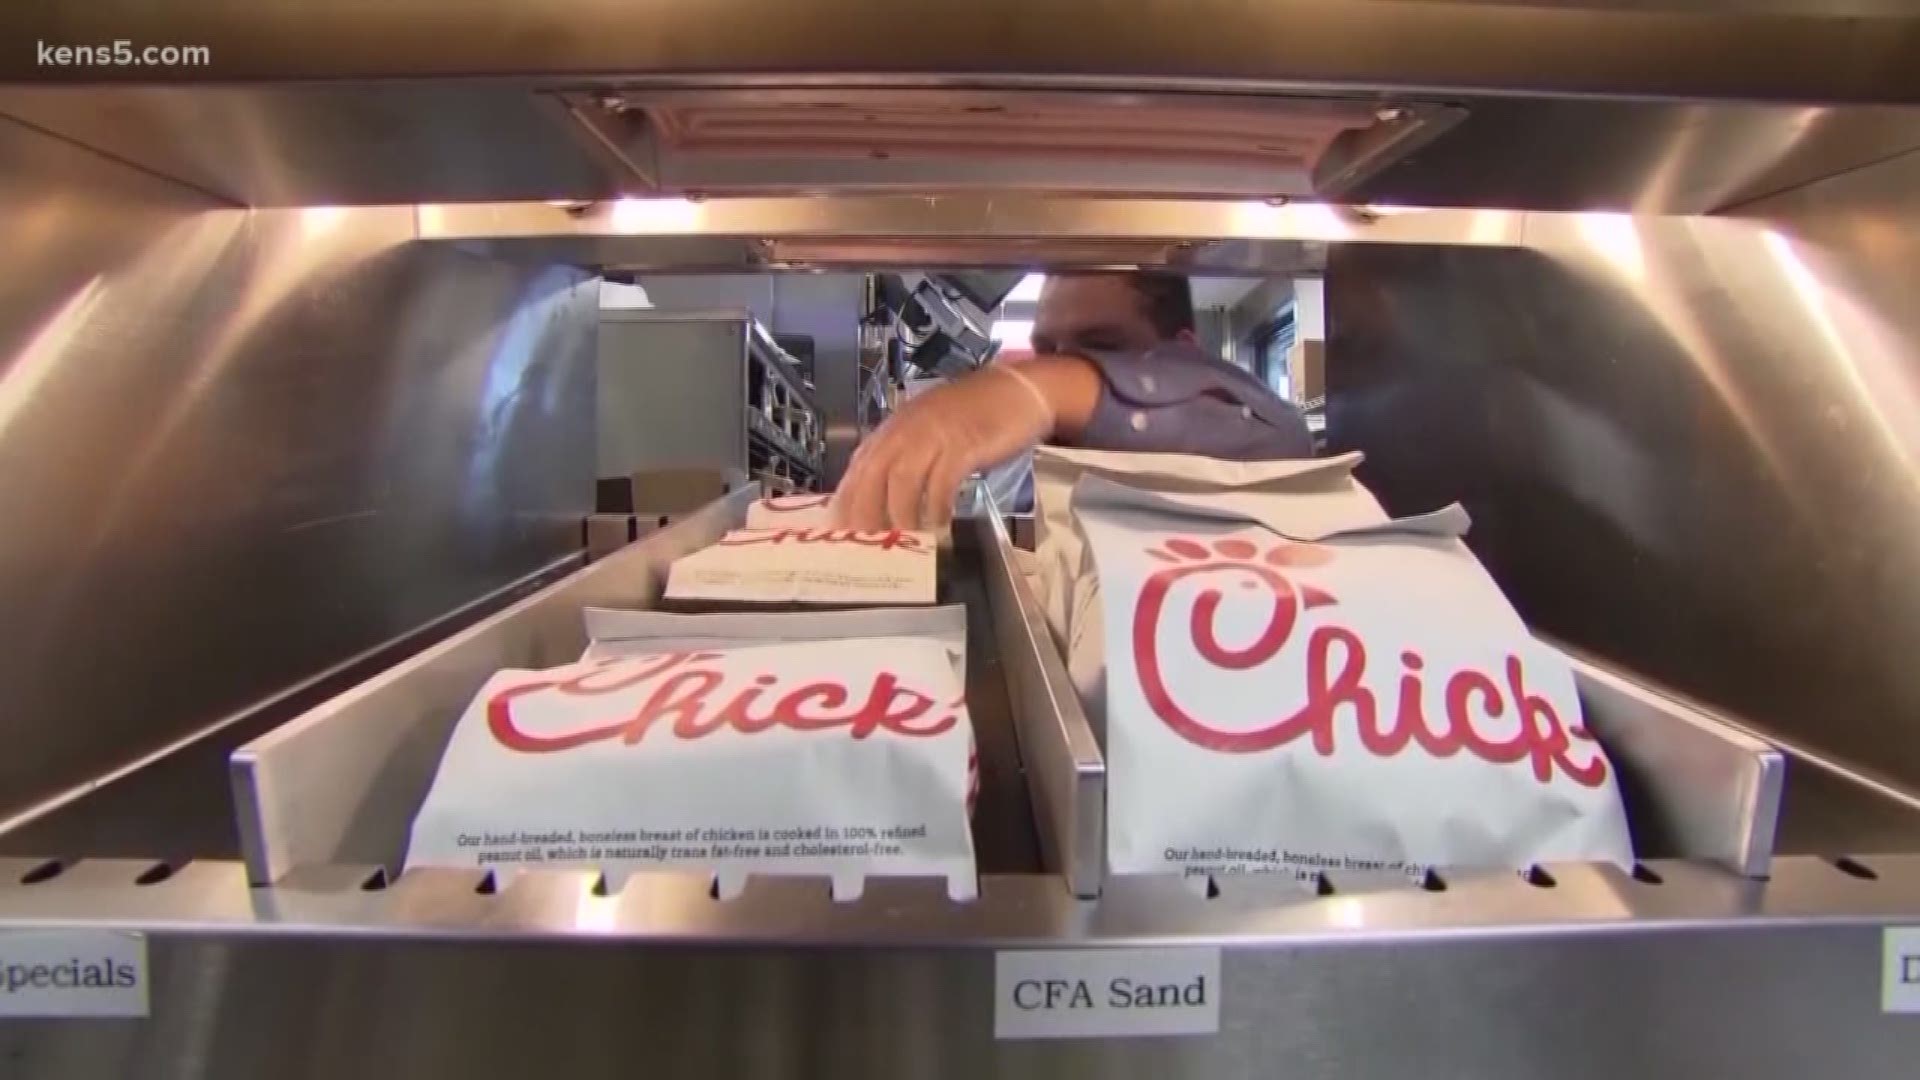 The Texas Attorney General is requesting records concerning the San Antonio city council's decision to exclude Chick-fil-A as an airport concession.